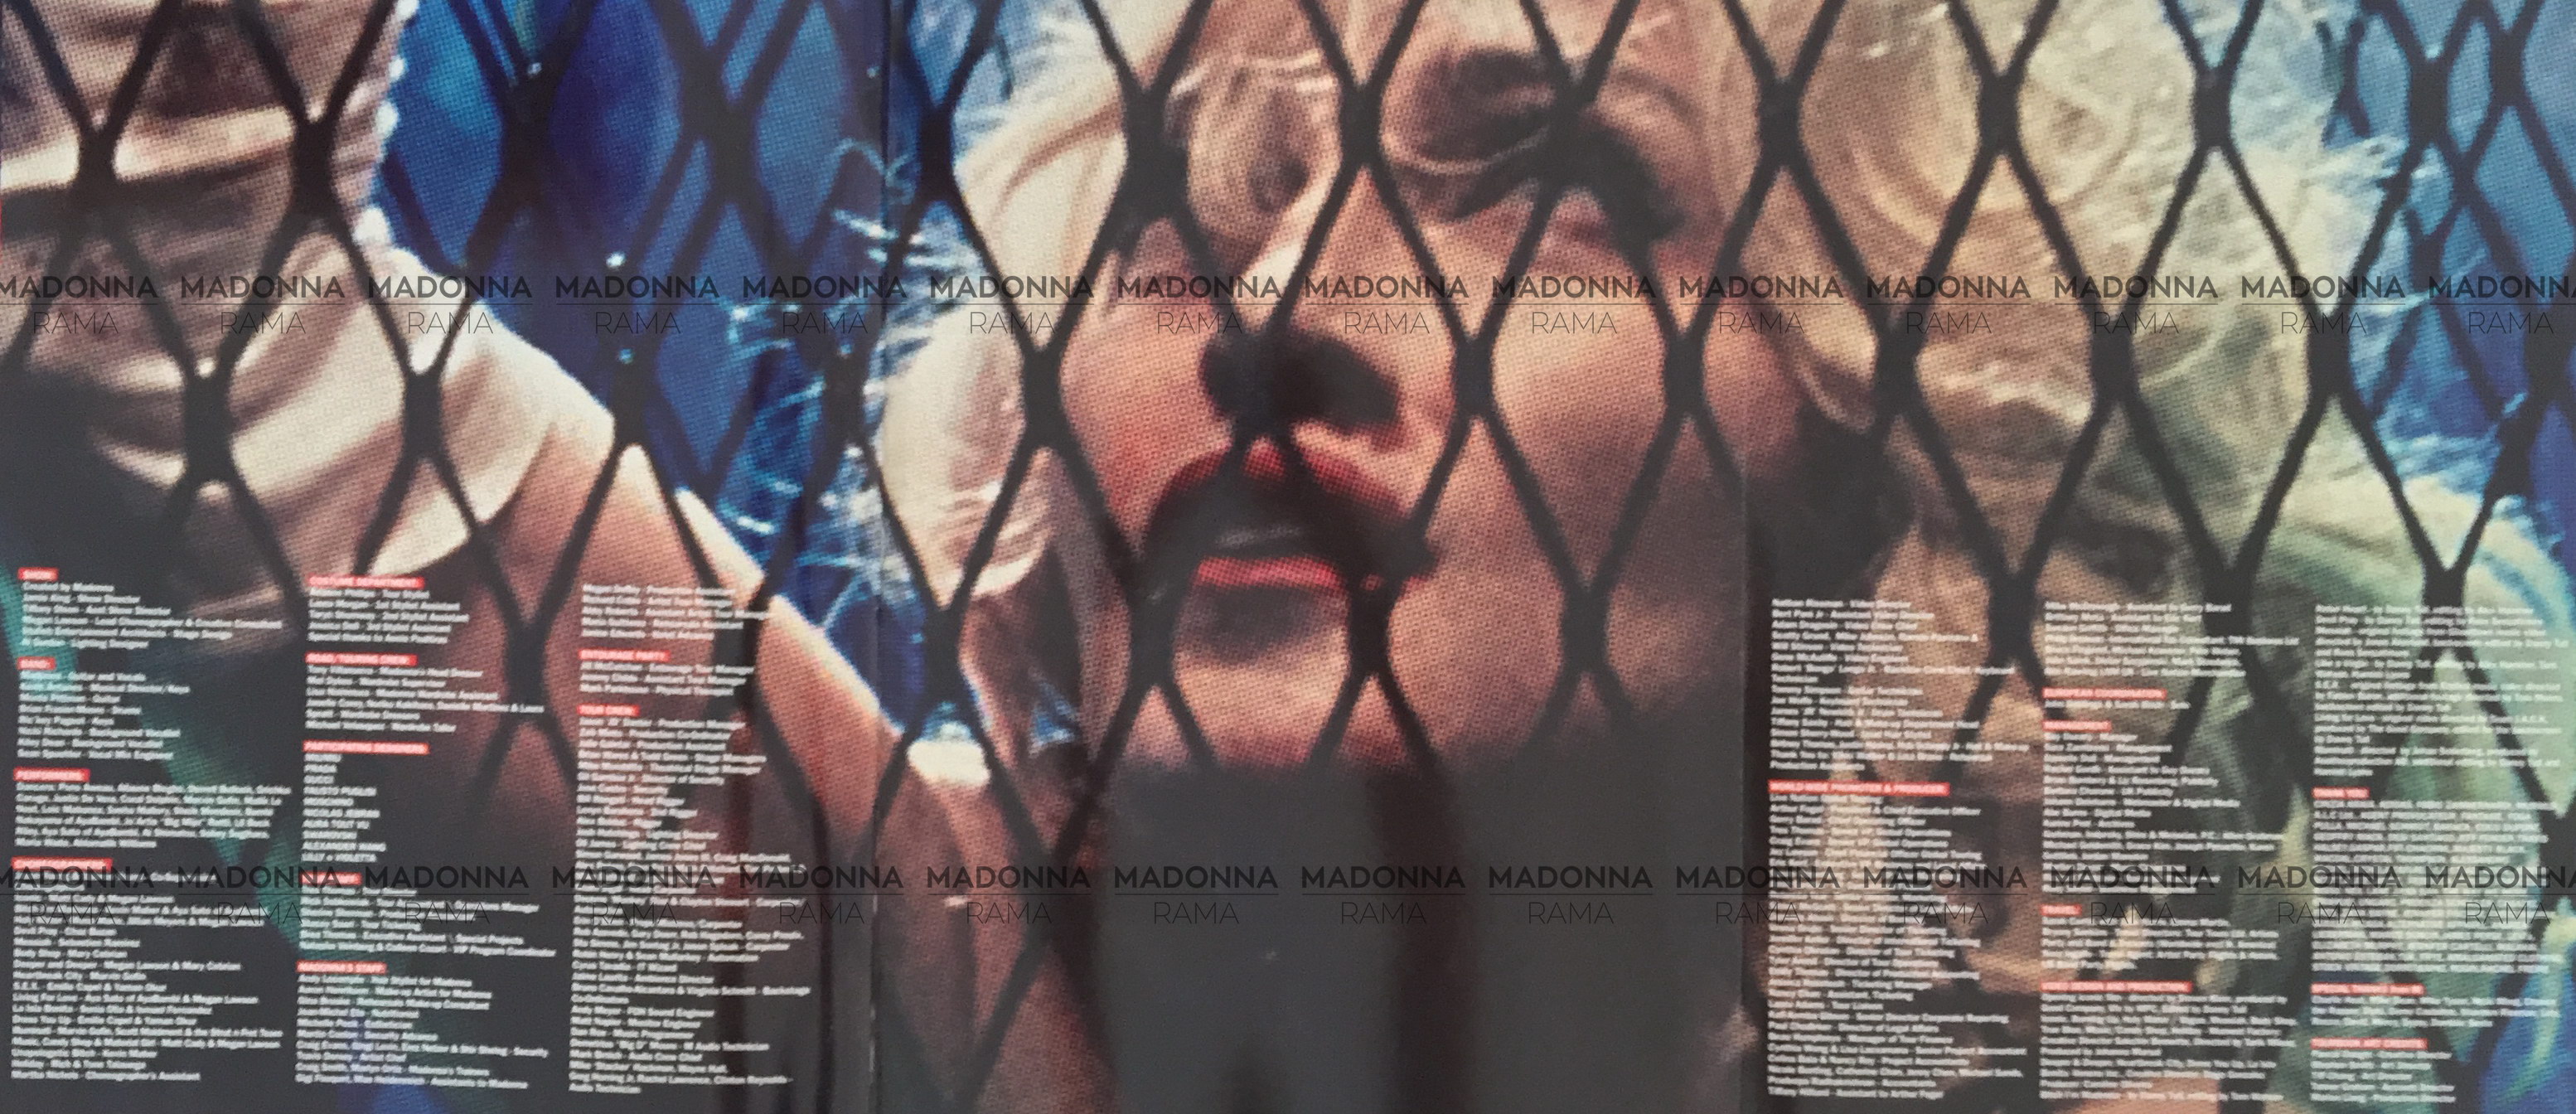 20150913-pictures-madonna-rebel-heart-to